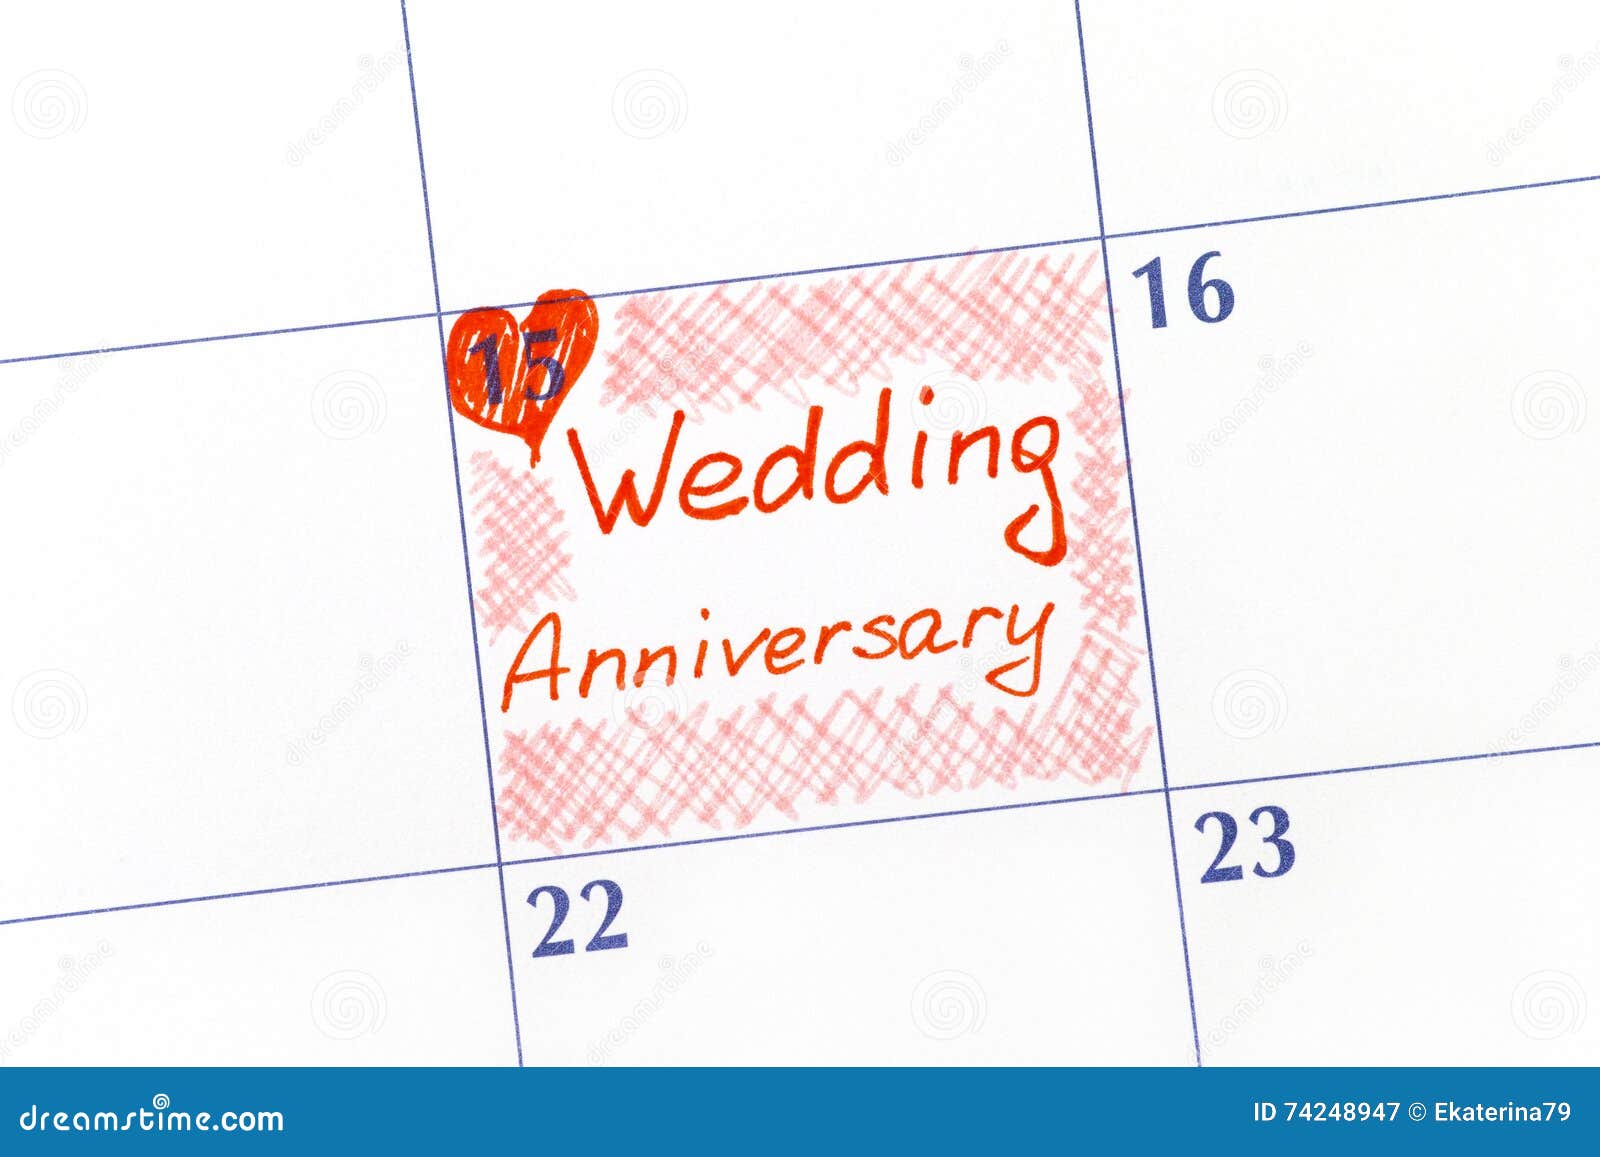 Reminder Wedding Anniversary in Calendar. Stock Image Image of letter